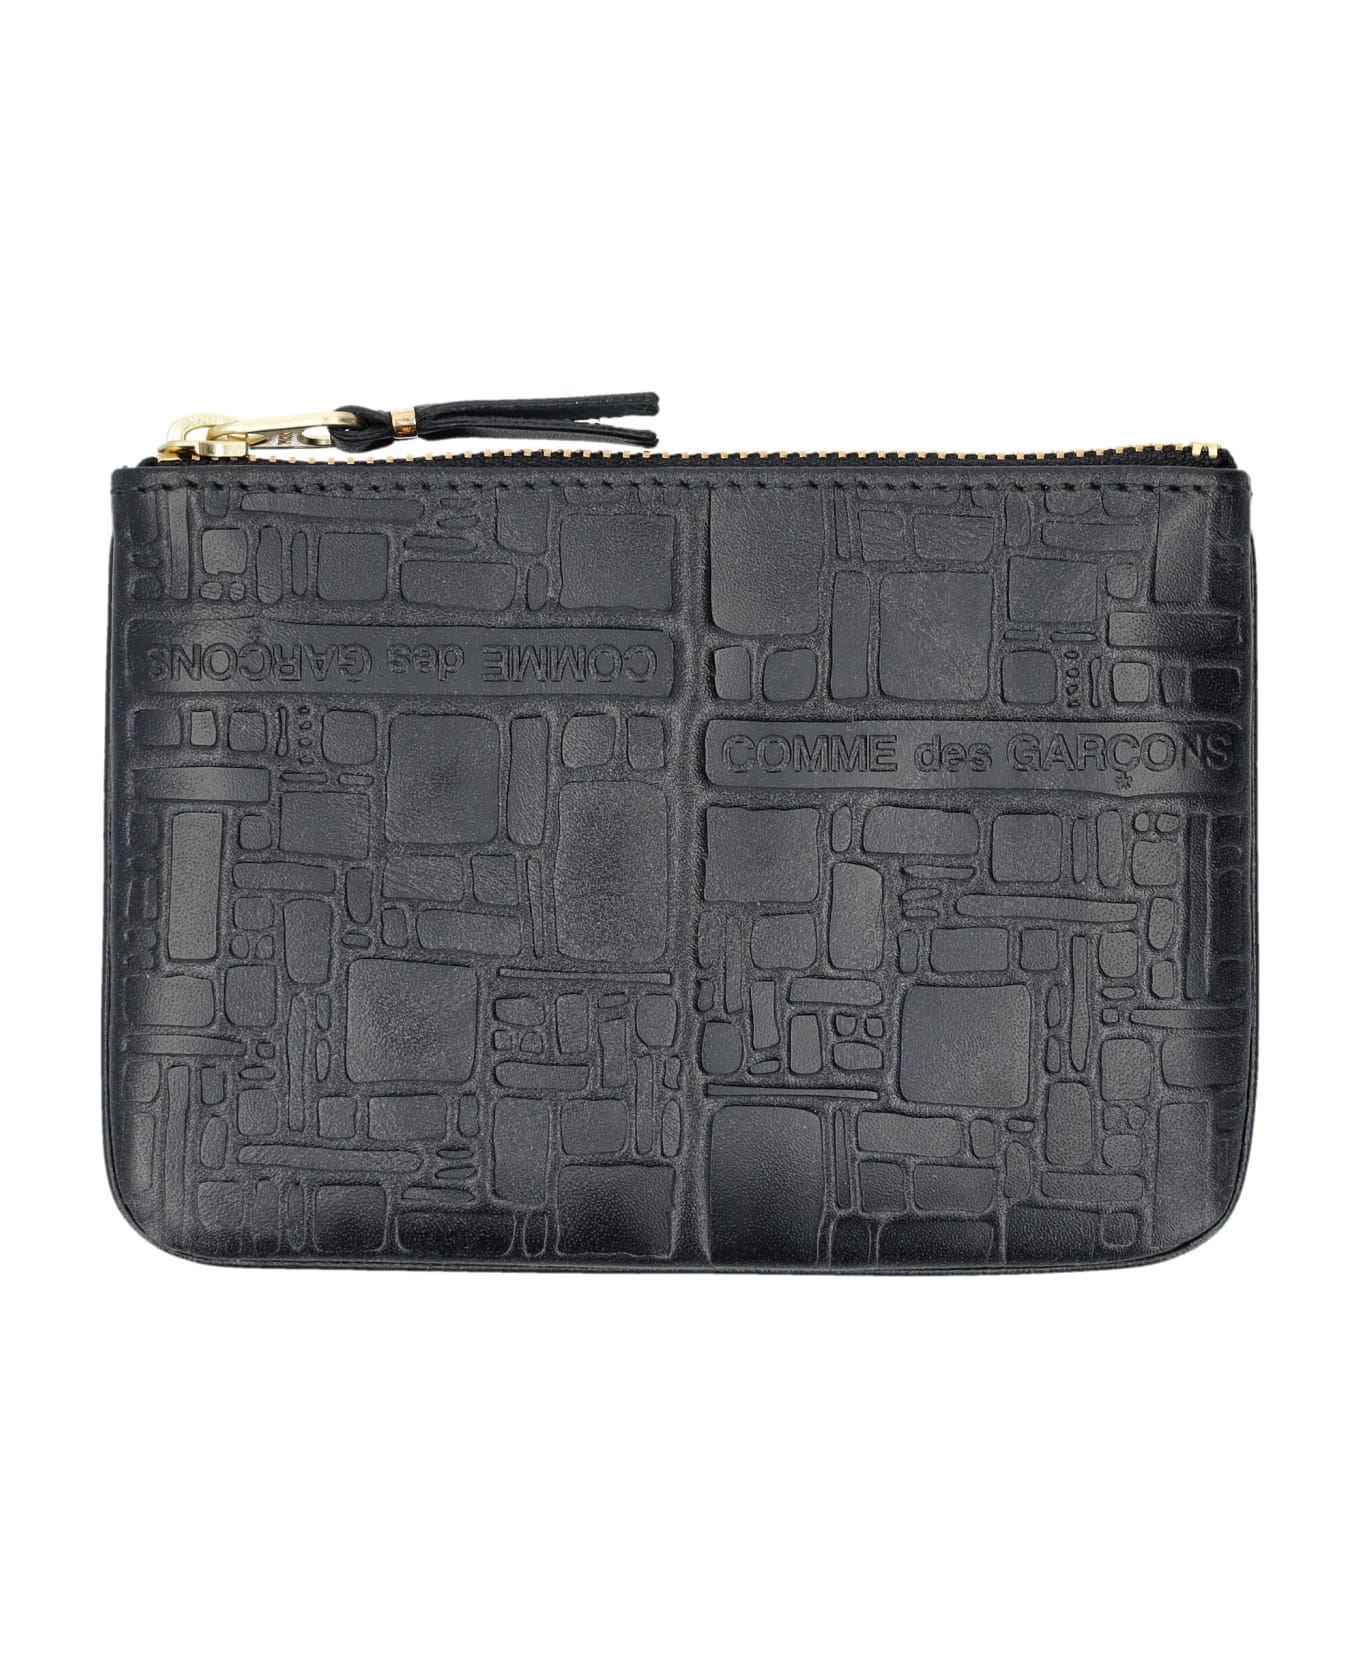 Comme des Garçons Wallet Embossed Logotype Xsmall Pouch - BLACK